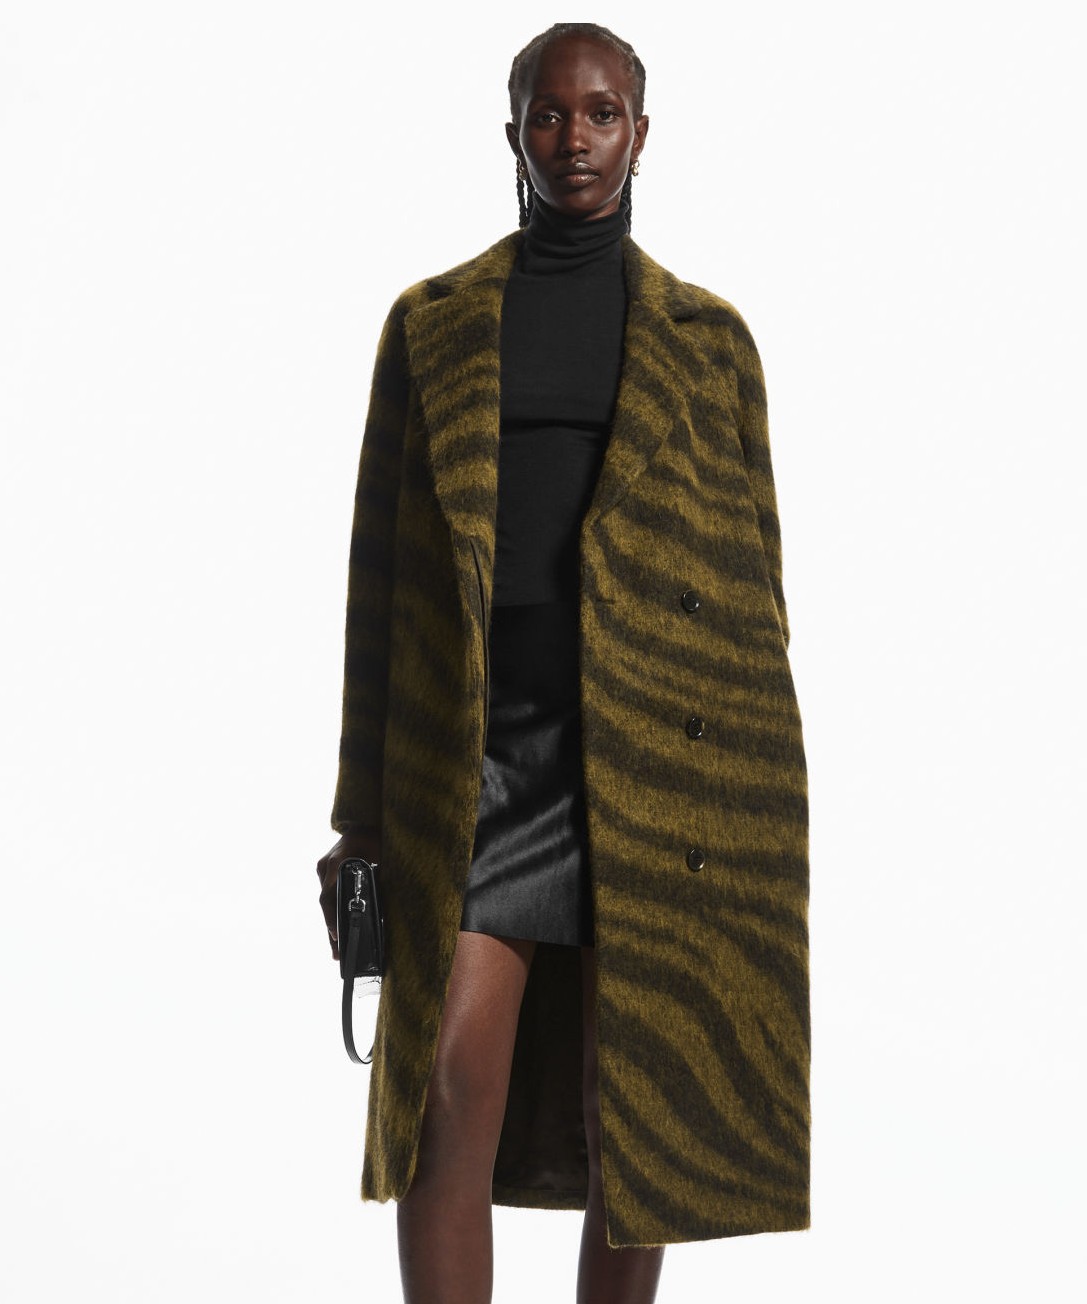 Image of a model wearing a black turtleneck, a black skirt and a muted zebra print wool Cos coat